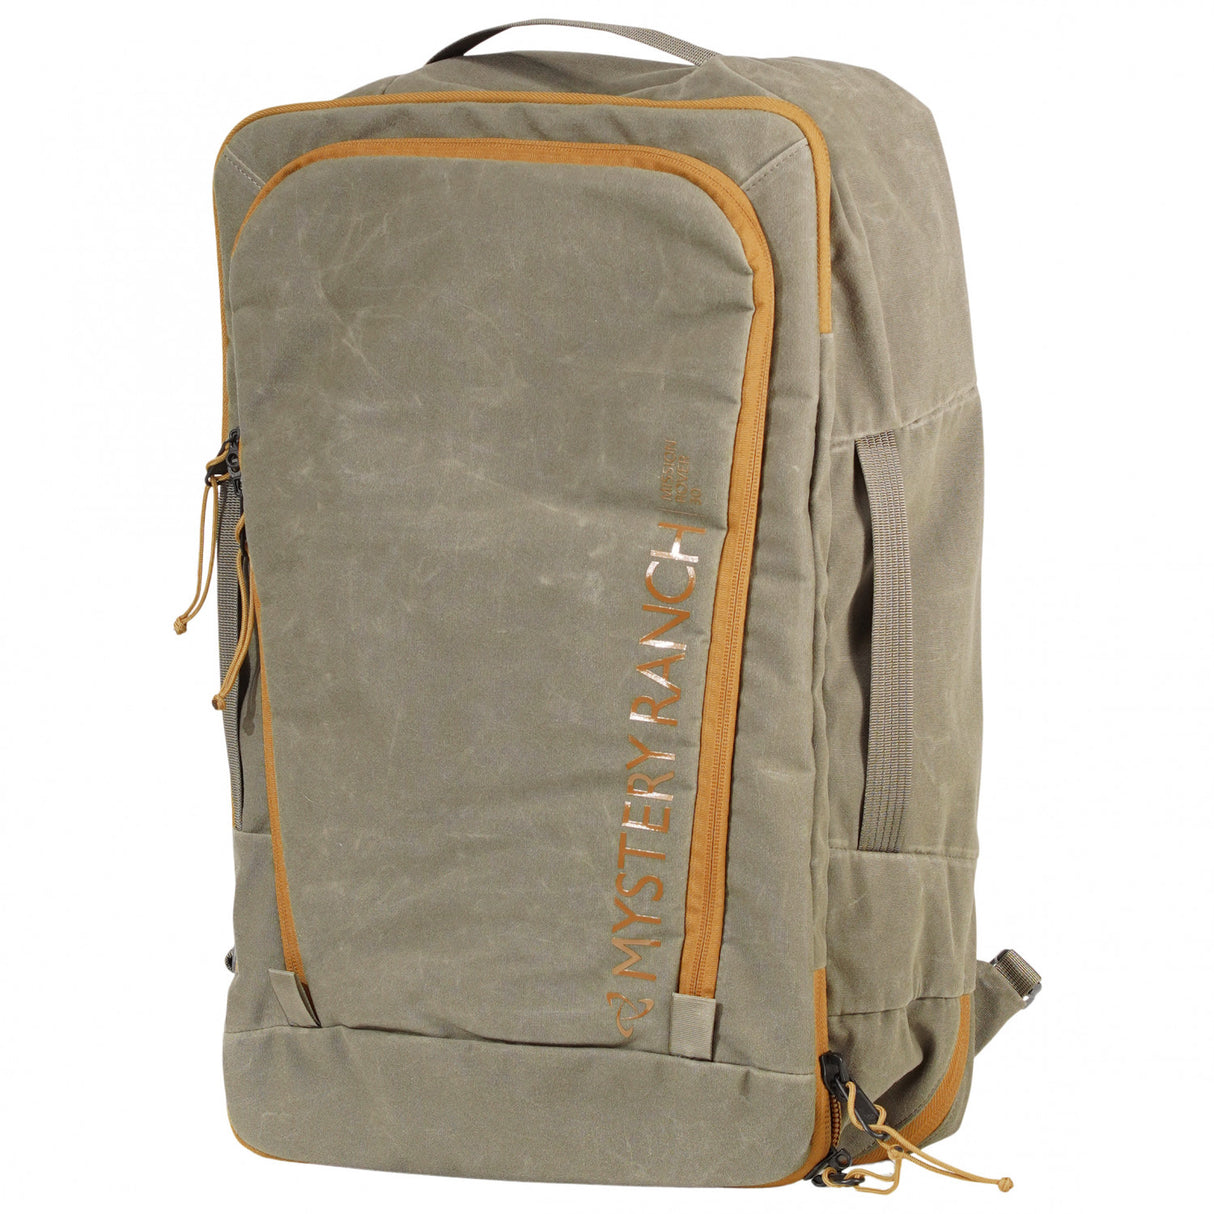 Mystery Ranch Unisex Mission Rover 30 Backpack - One Size - Sportandleisure.com